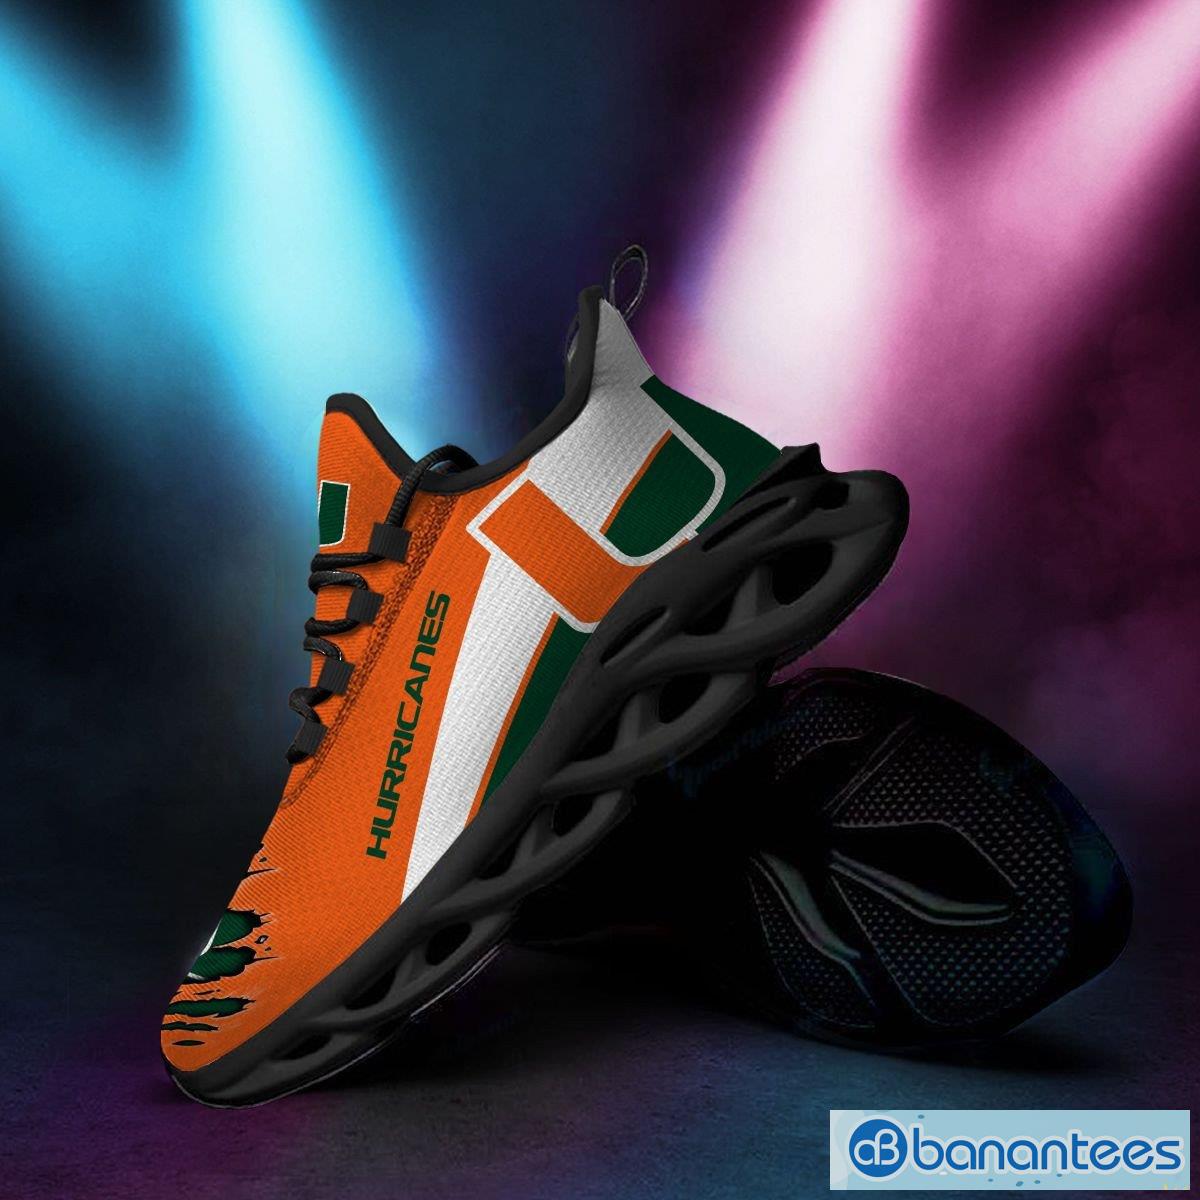 Miami Marlins NFL Fan Running Sneakers For Men And Women - Banantees